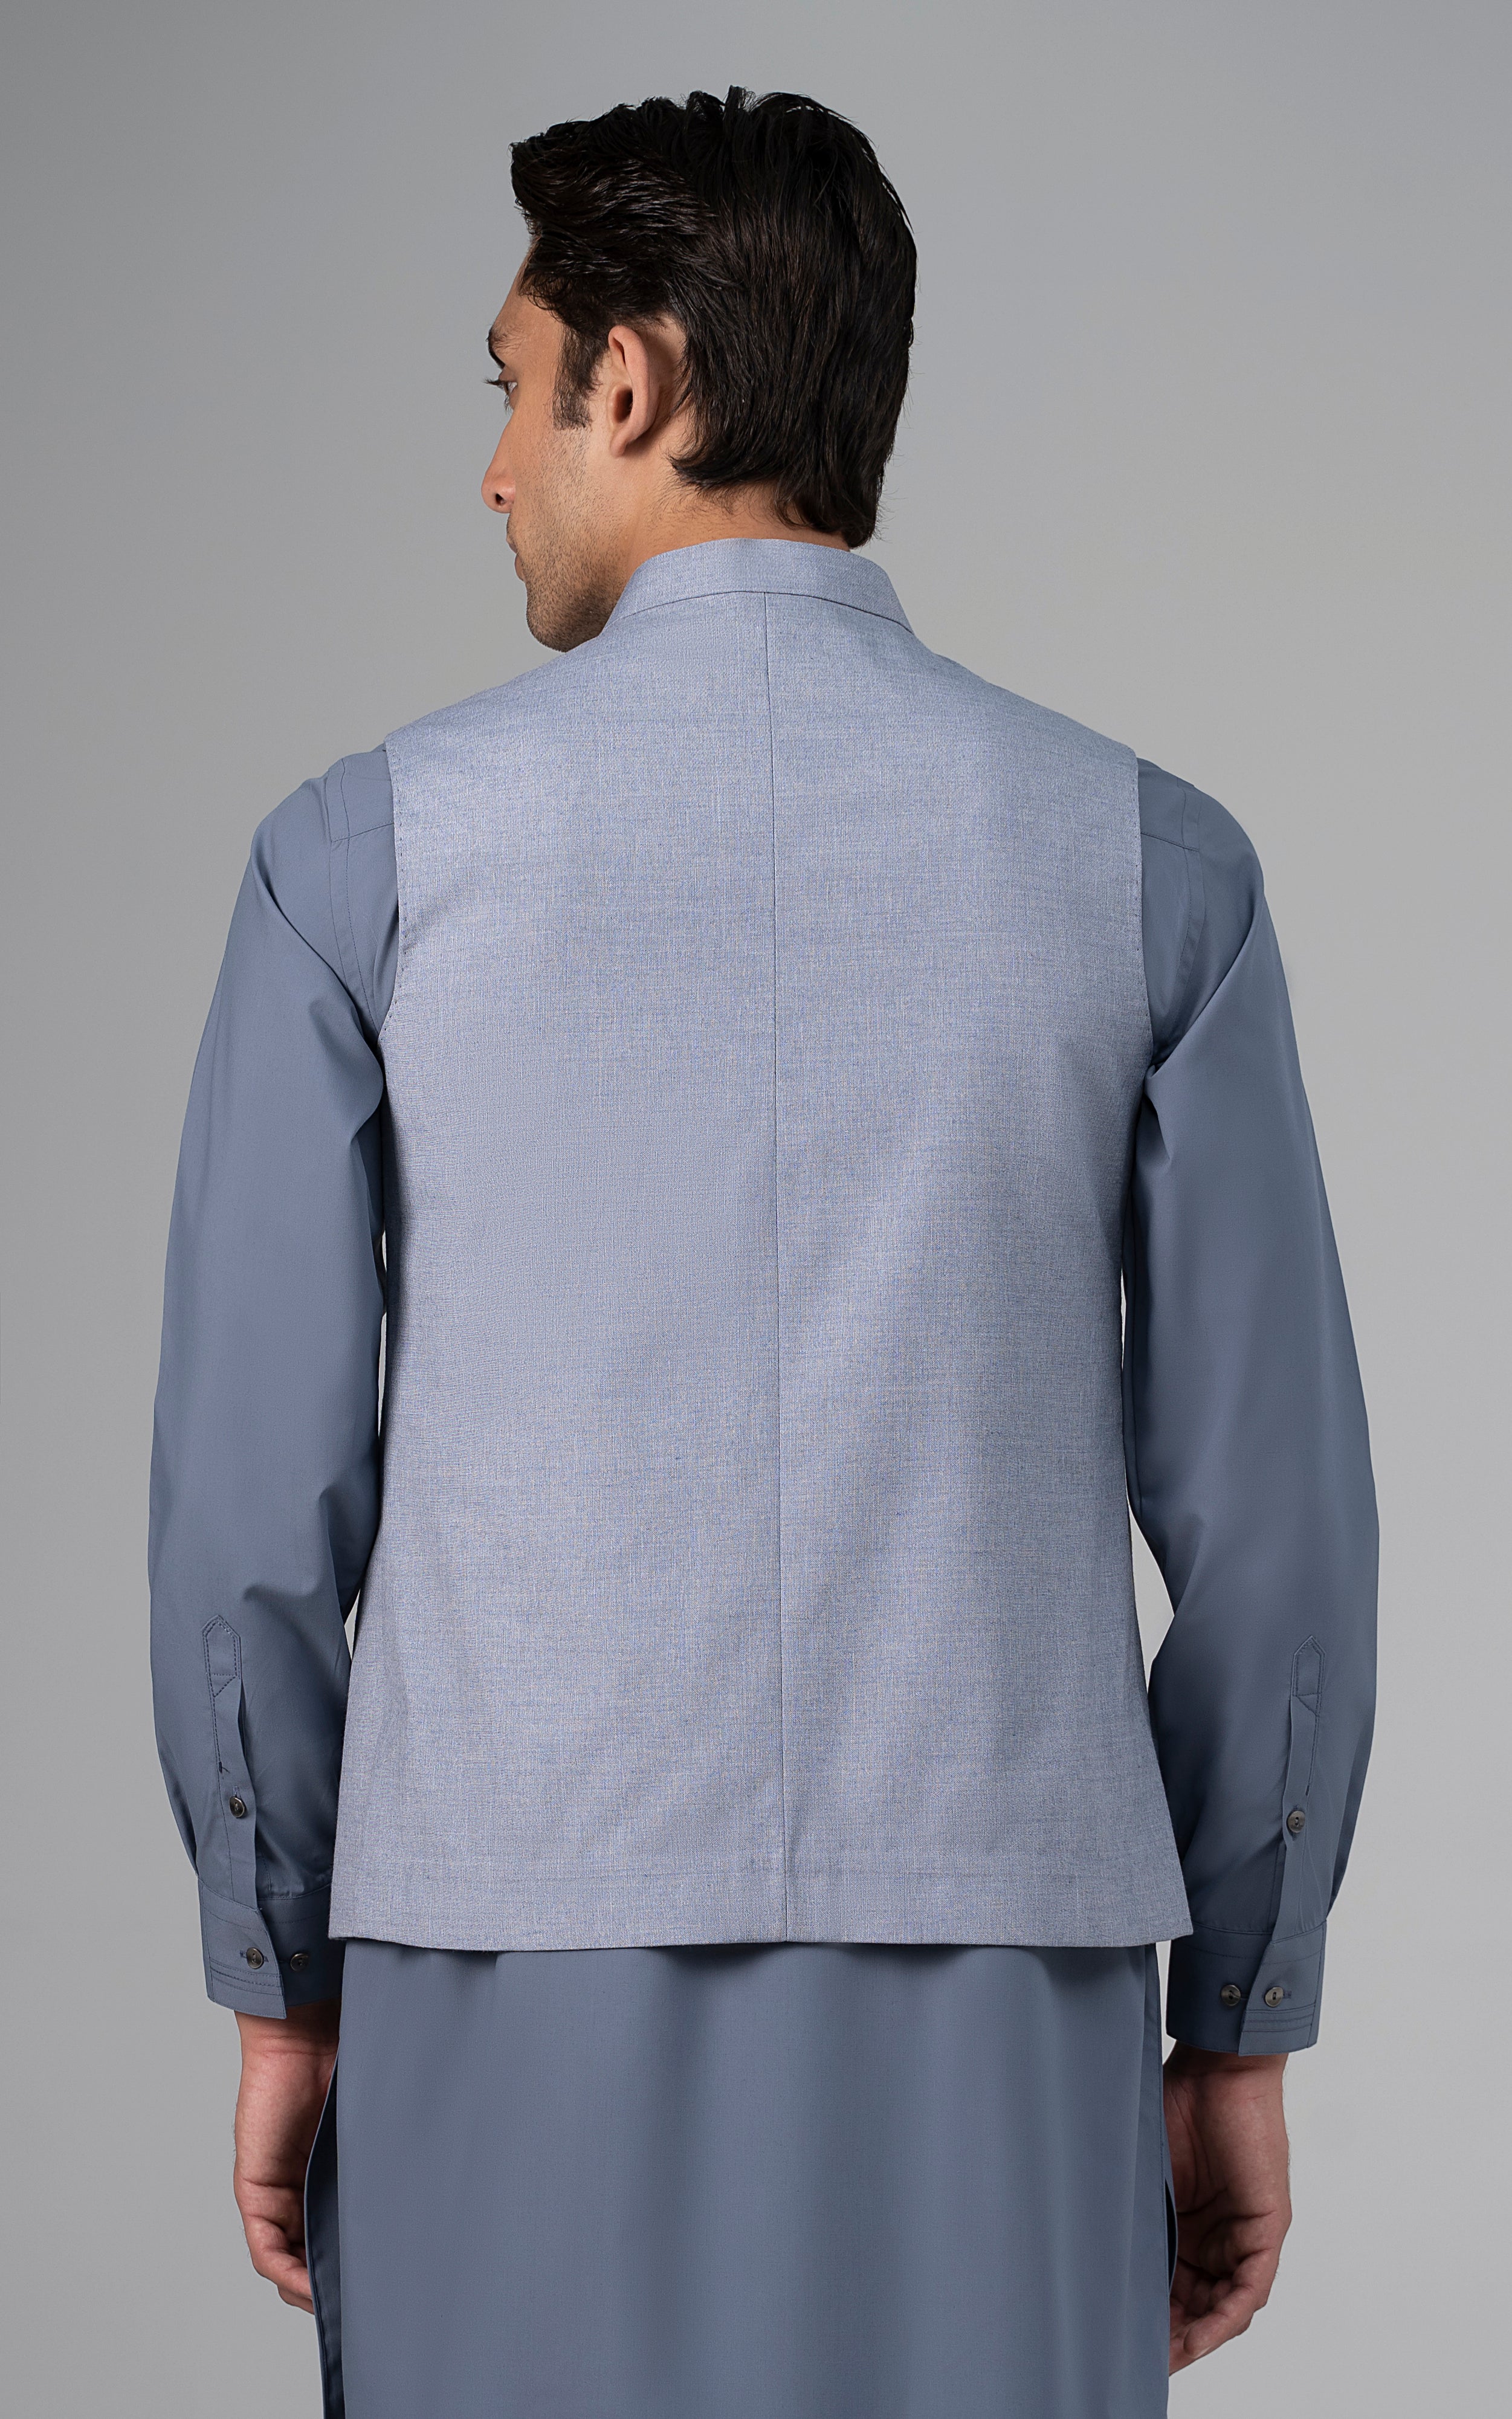 BLENDED WAISTCOAT - PREMIUM COLLECTION CLOUDY BLUE